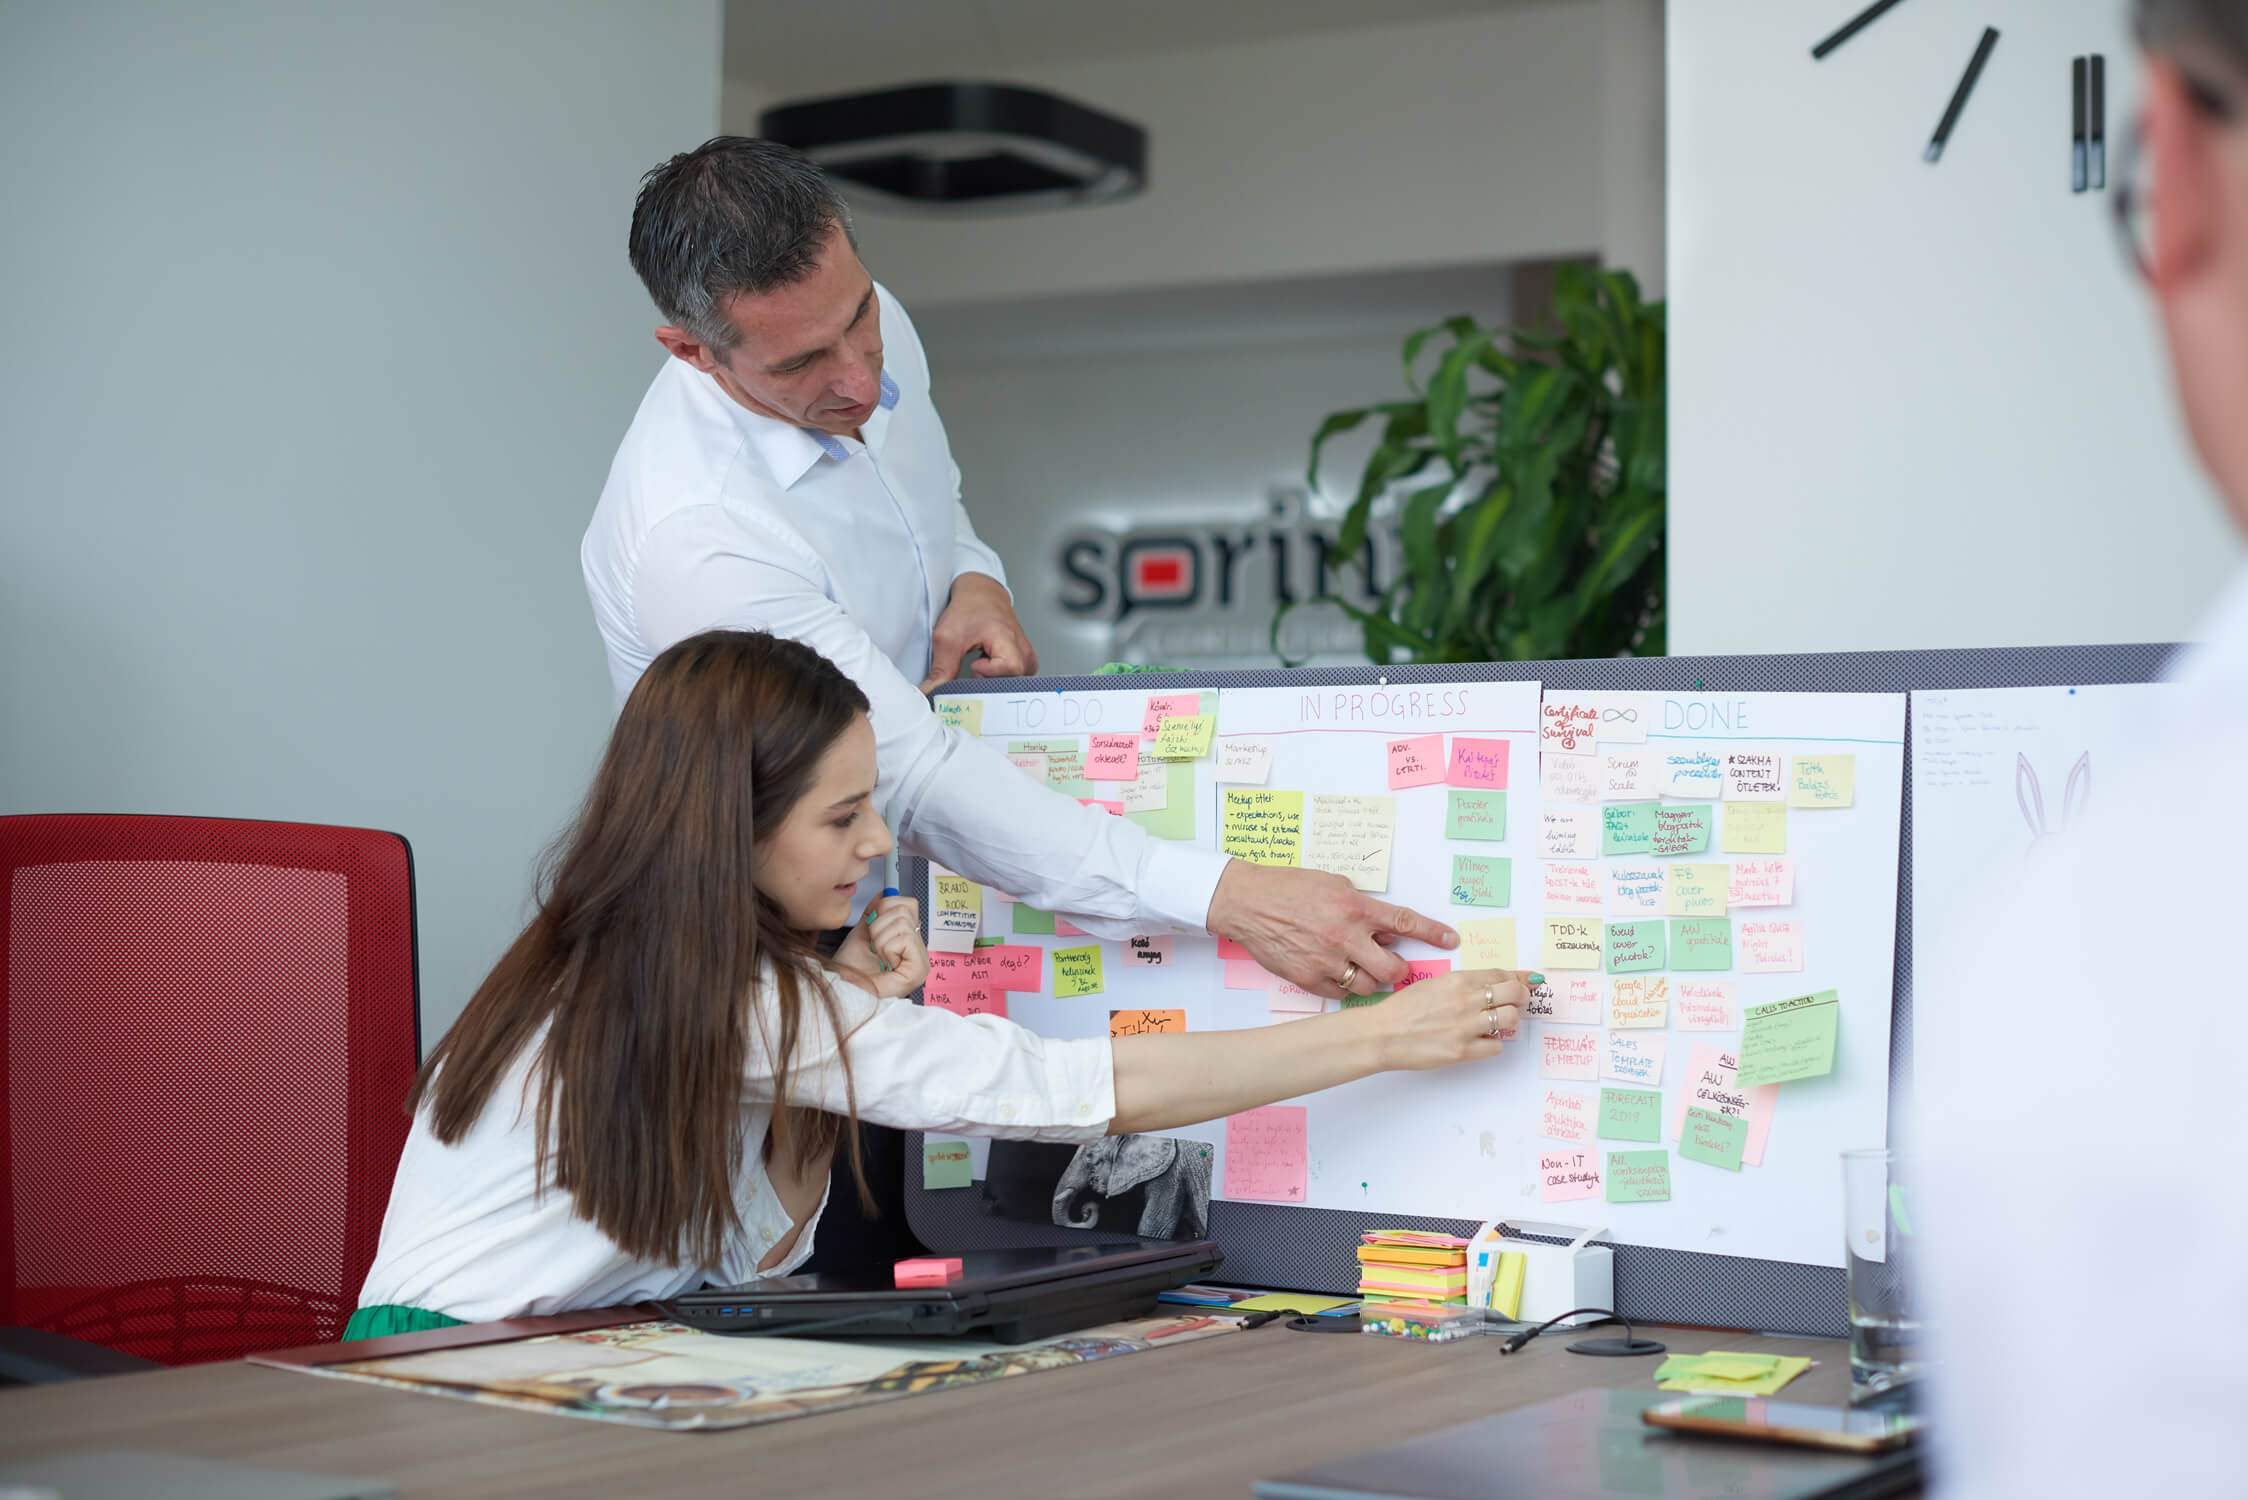 New Certified Agile Leadership Training: We bring you the details